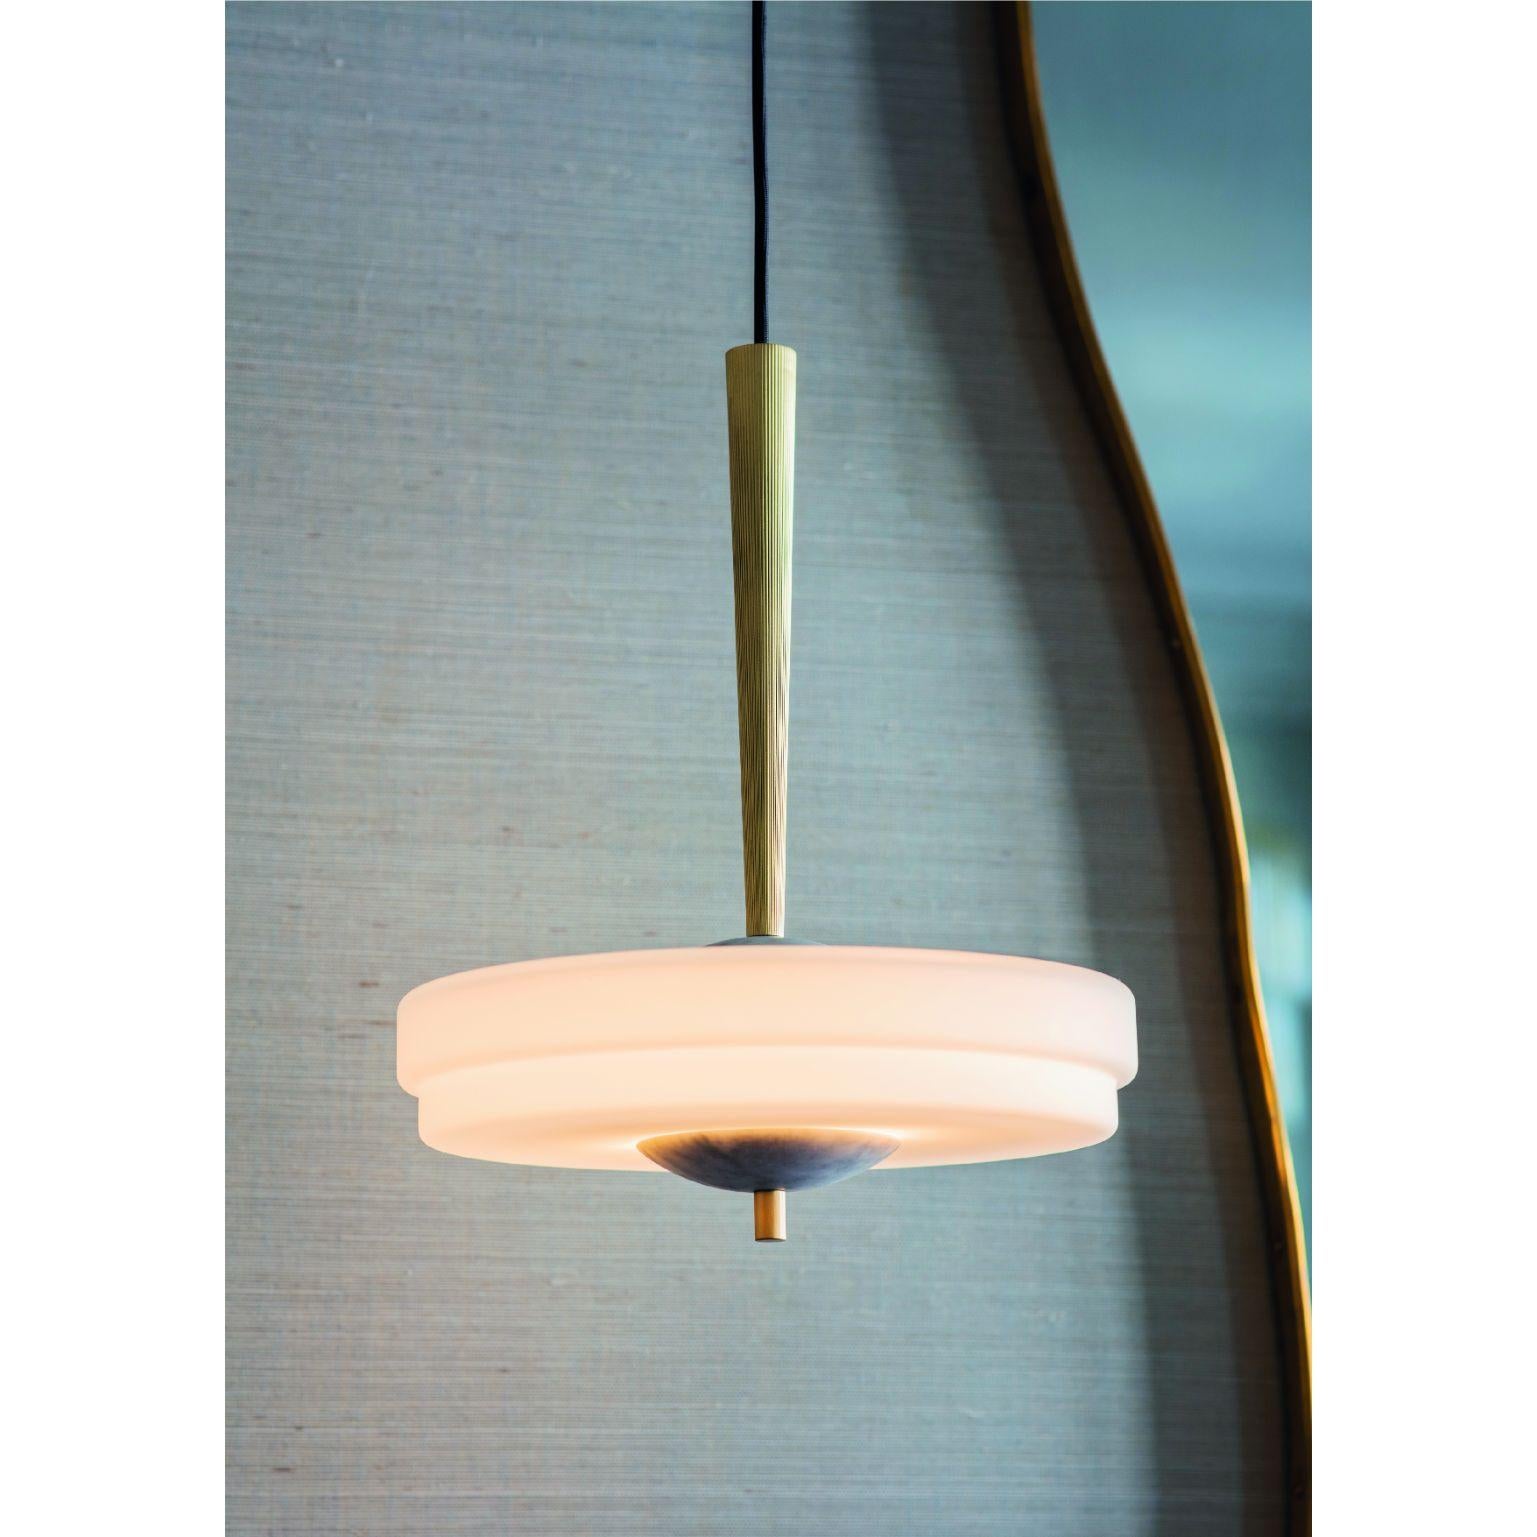 Trave pendant light white by Bert Frank
Dimensions: 60-200 x 30 x 6 cm
Materials: Brass, glass, marble

Available in green or white colors.

Suspended from a reeded, fluted brass stem, the two-tier, soft-finish, opal glass shade with spherical